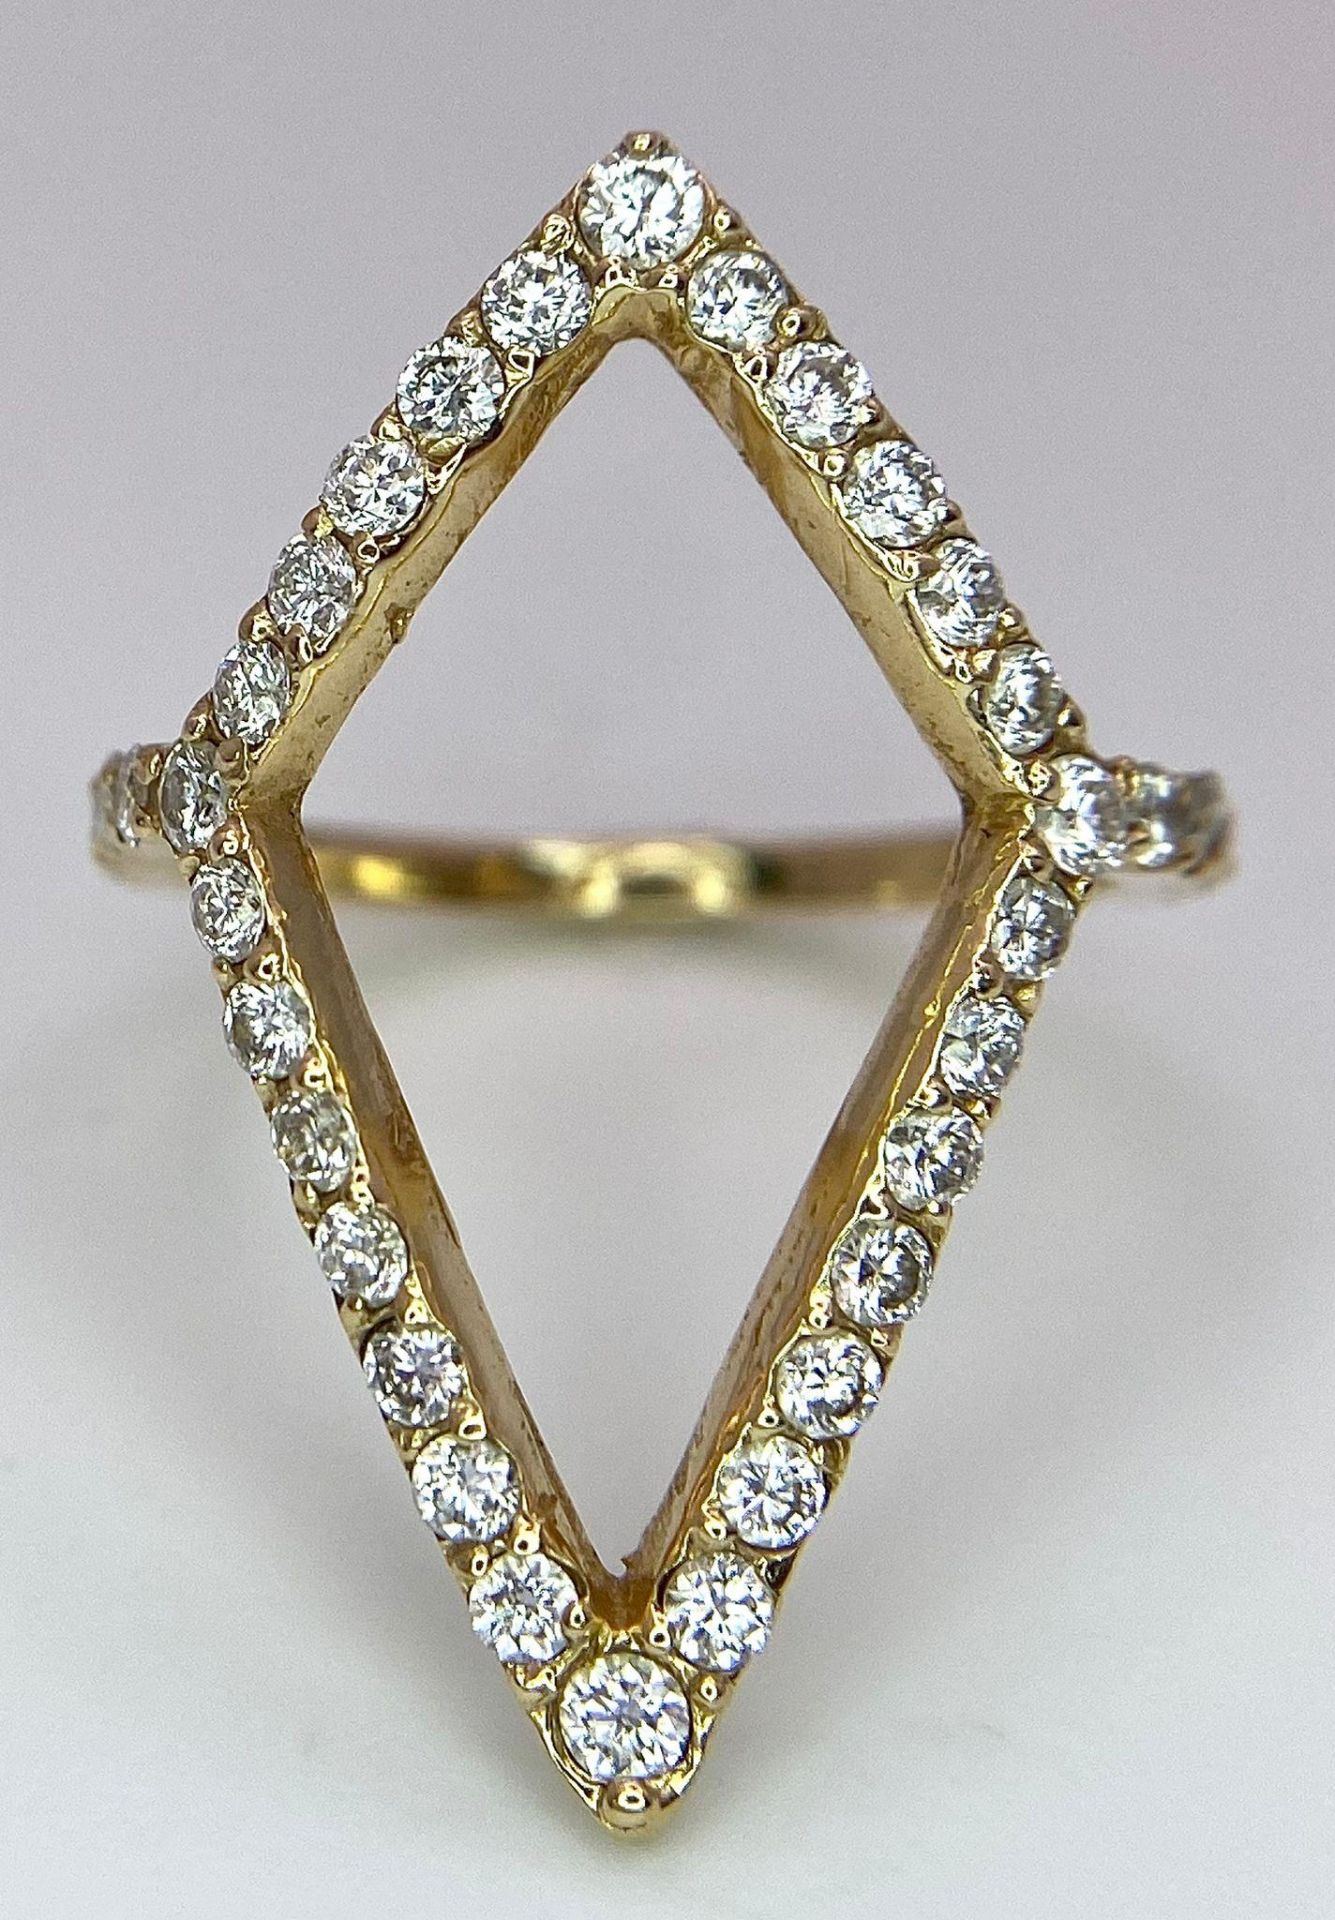 An 18K Yellow Gold (tested) Diamond Trillion Shaped Ring. Size J. 2.6g weight. Ref: 016674 - Image 2 of 4